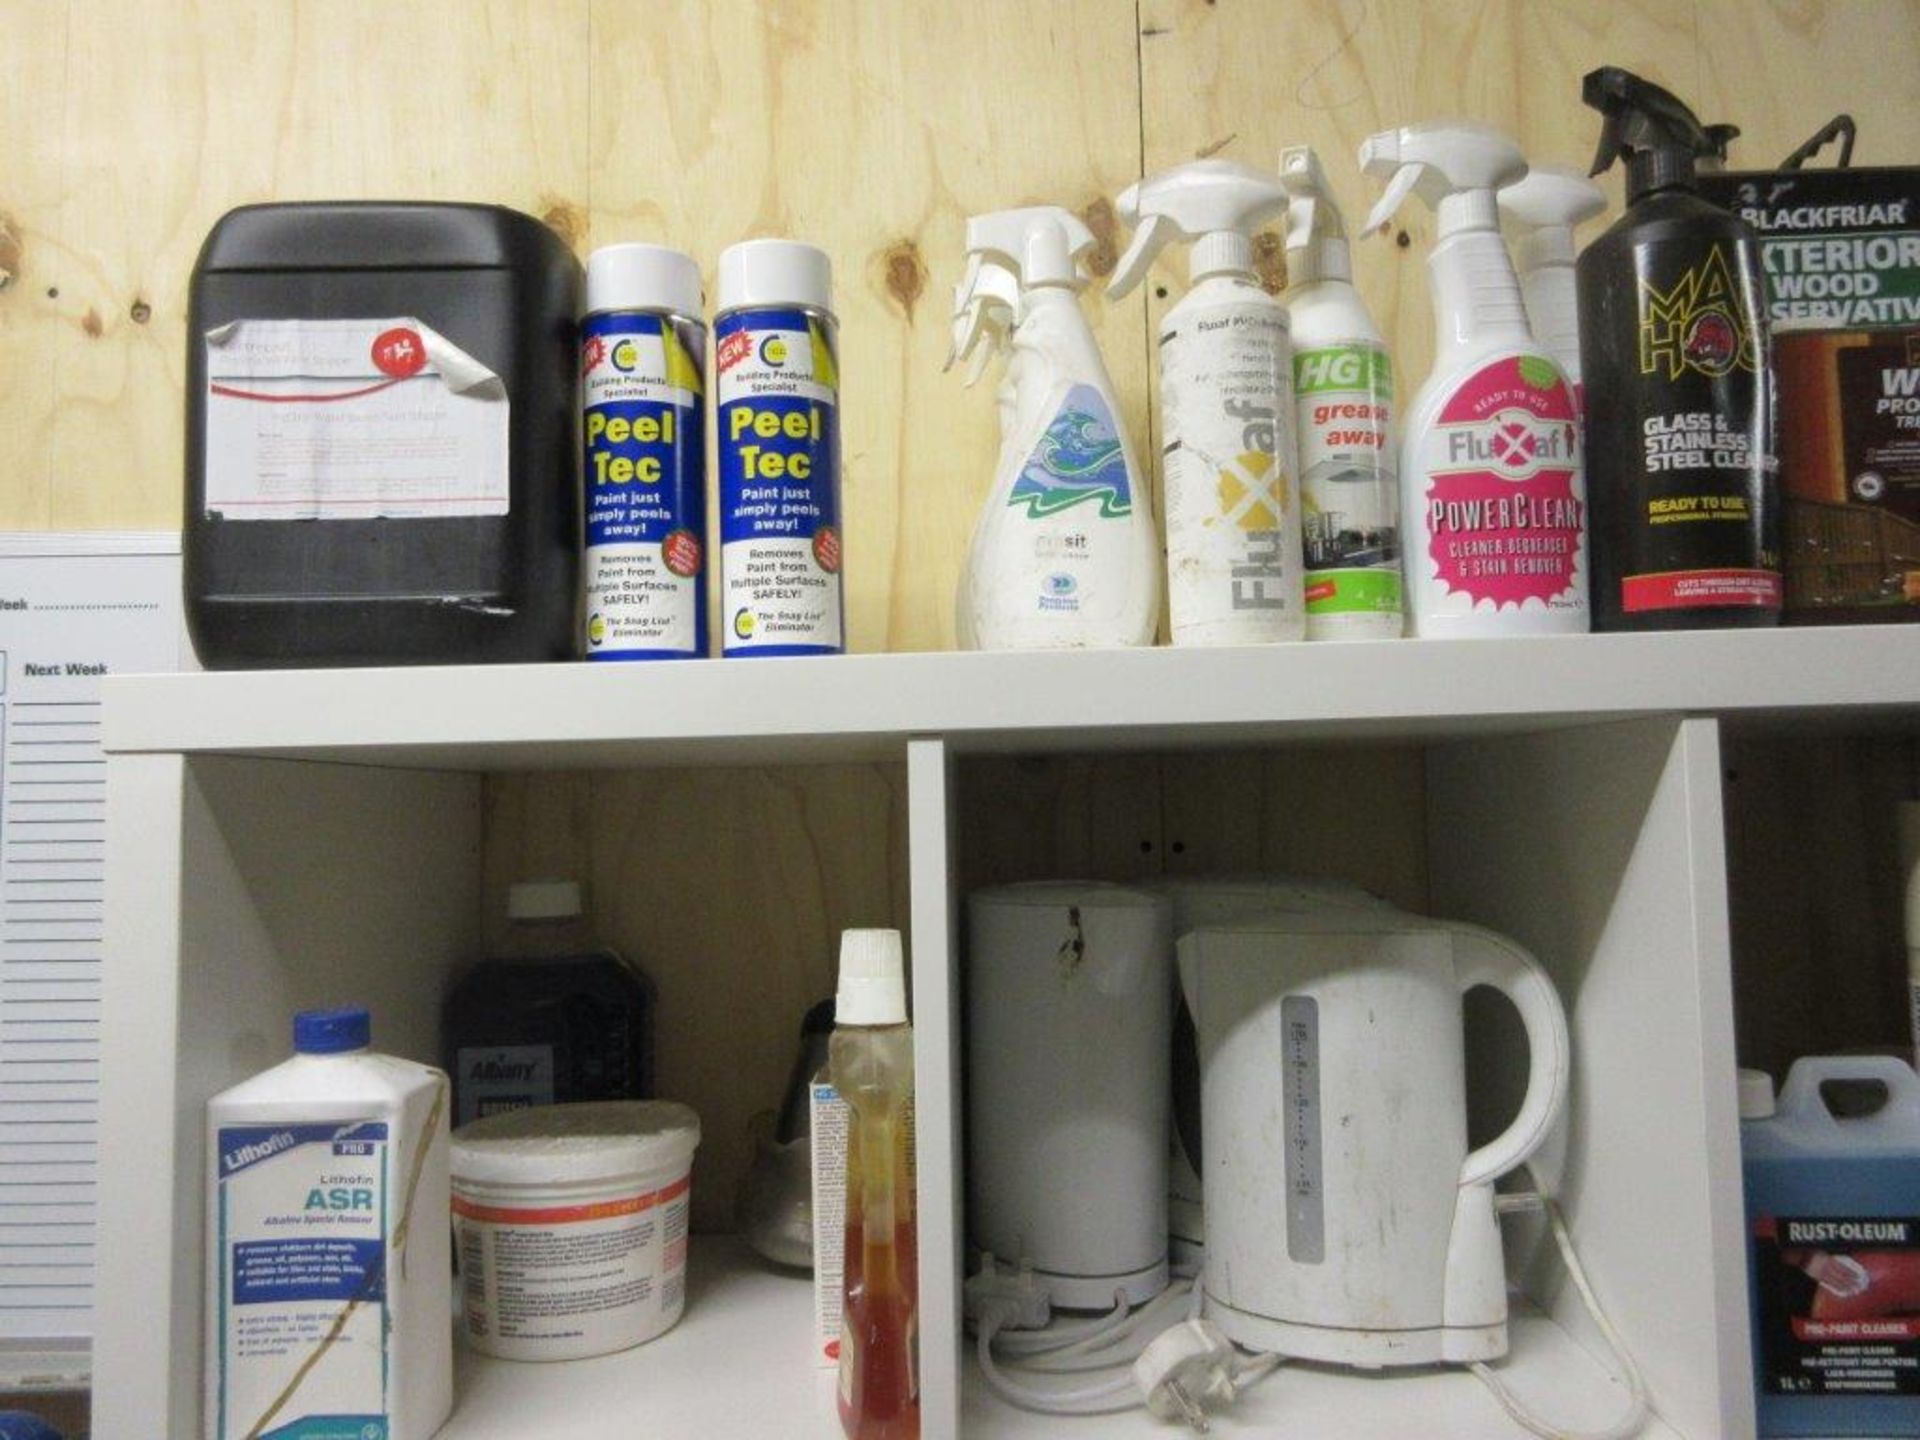 Pigeon hole and wood storage racks c/w contents including sealants, sealant guns, kettles, fire - Image 5 of 9